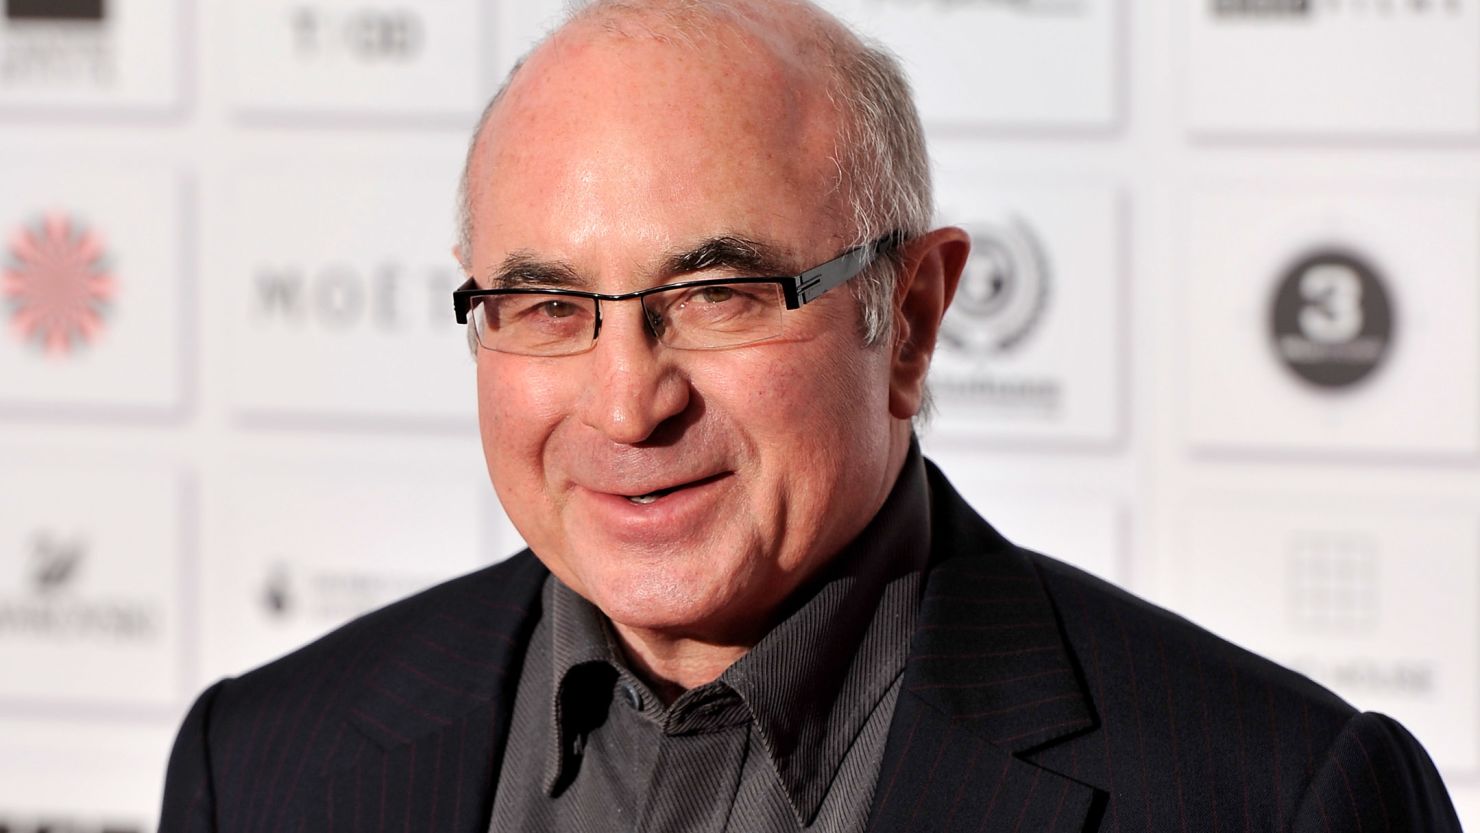 Actor Bob Hoskins, known to Americans for "Who Framed Roger Rabbit," was diagnosed with Parkinson's disease last year.